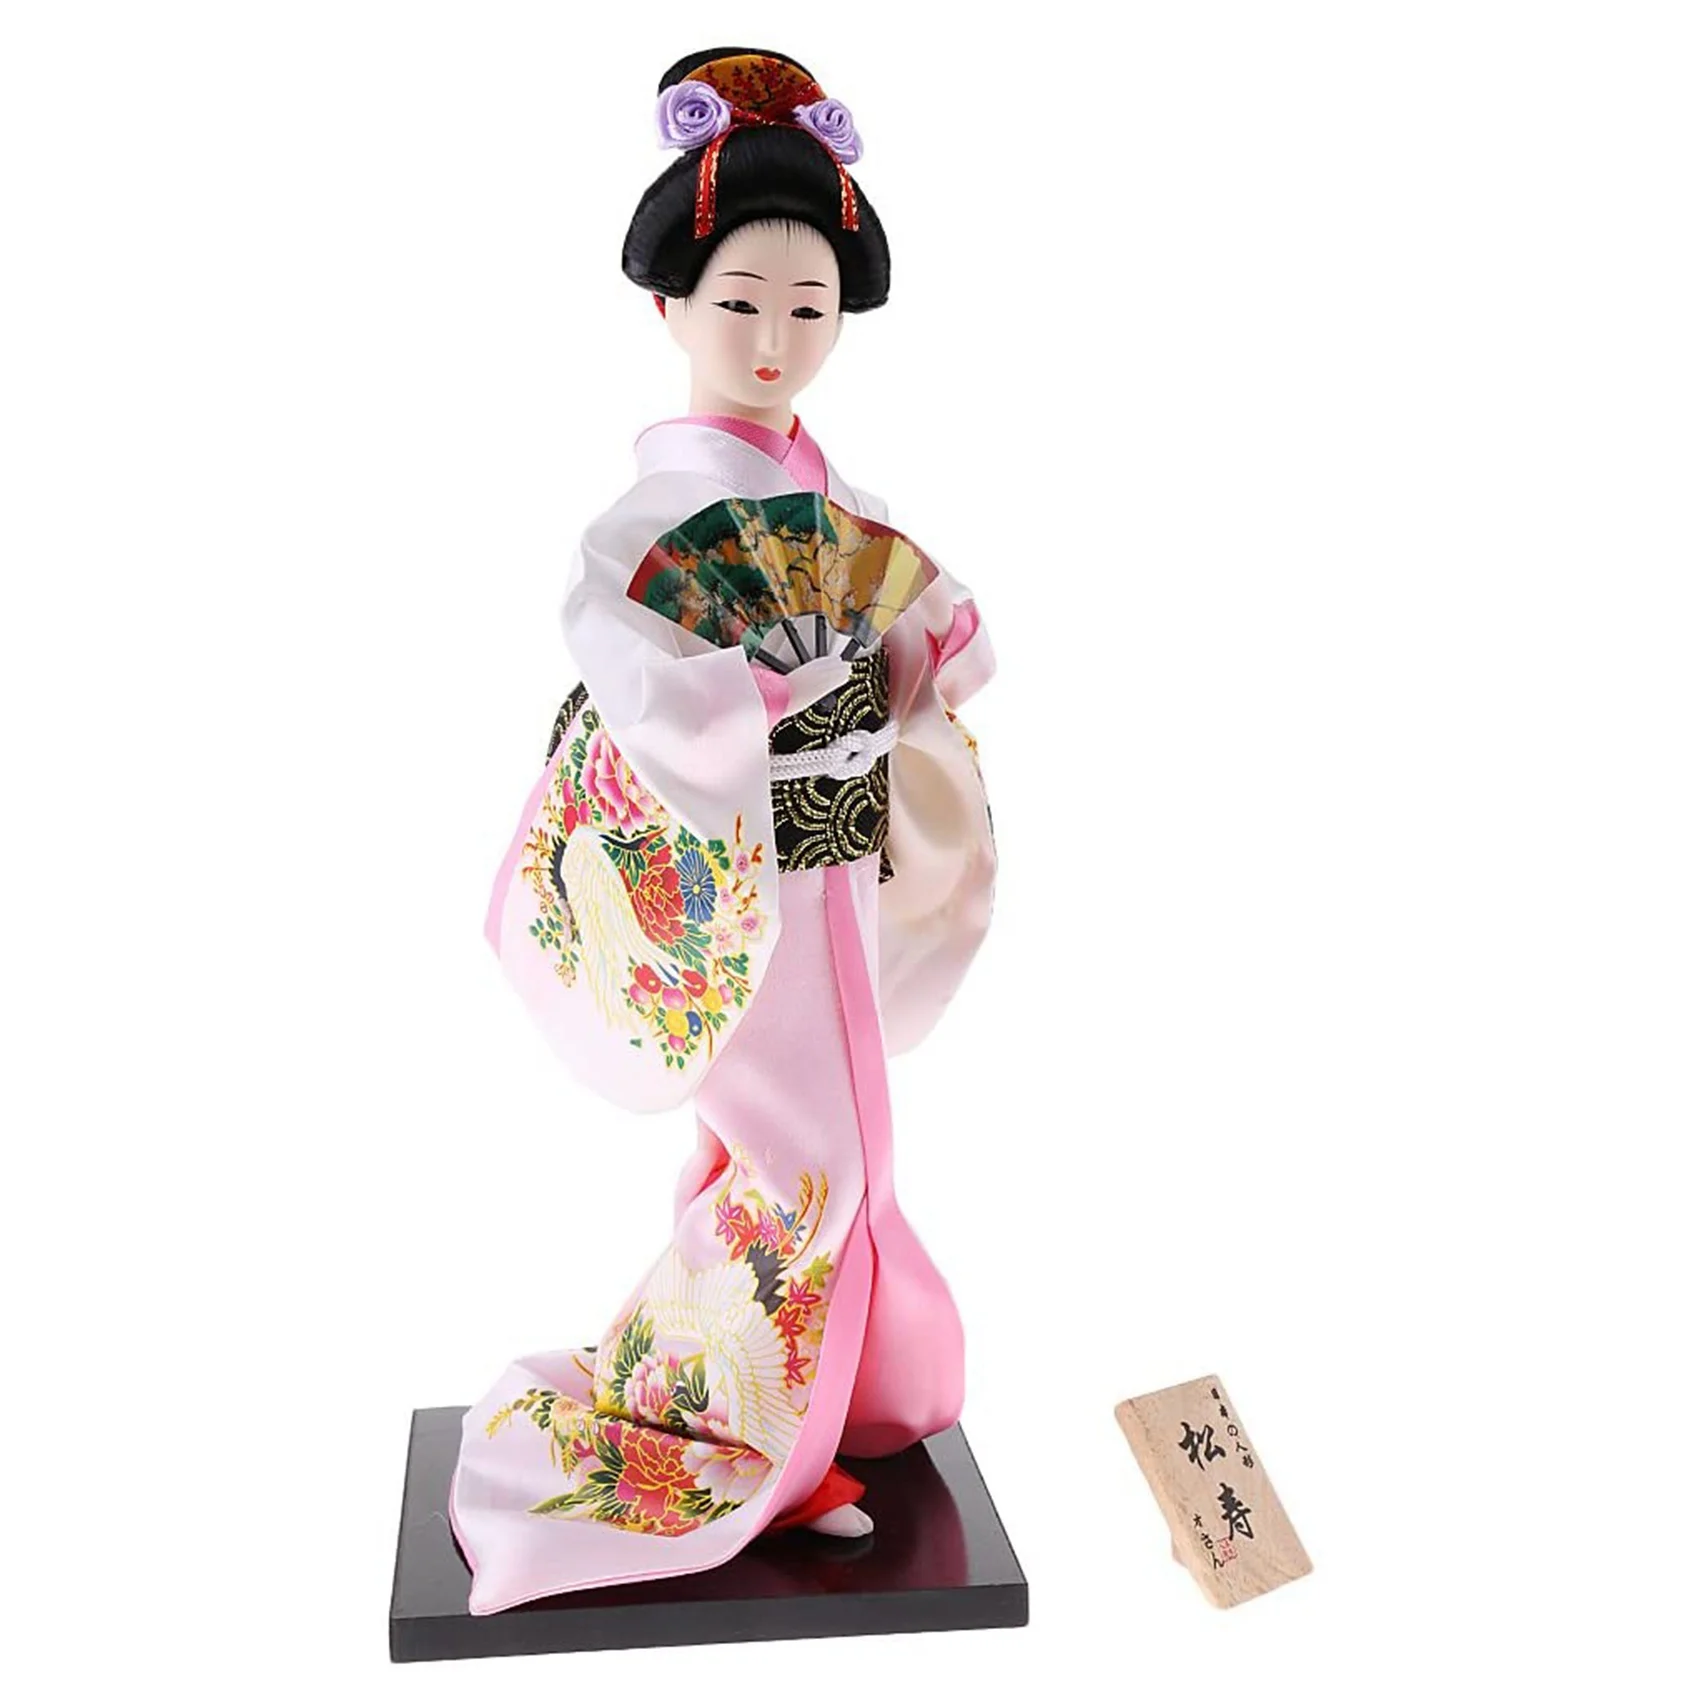 

12Inch Japanese Kimono Doll Geisha Figurine with Fan Ornaments Gift Art Craft Collectables Pink Cloth Gift for Girl